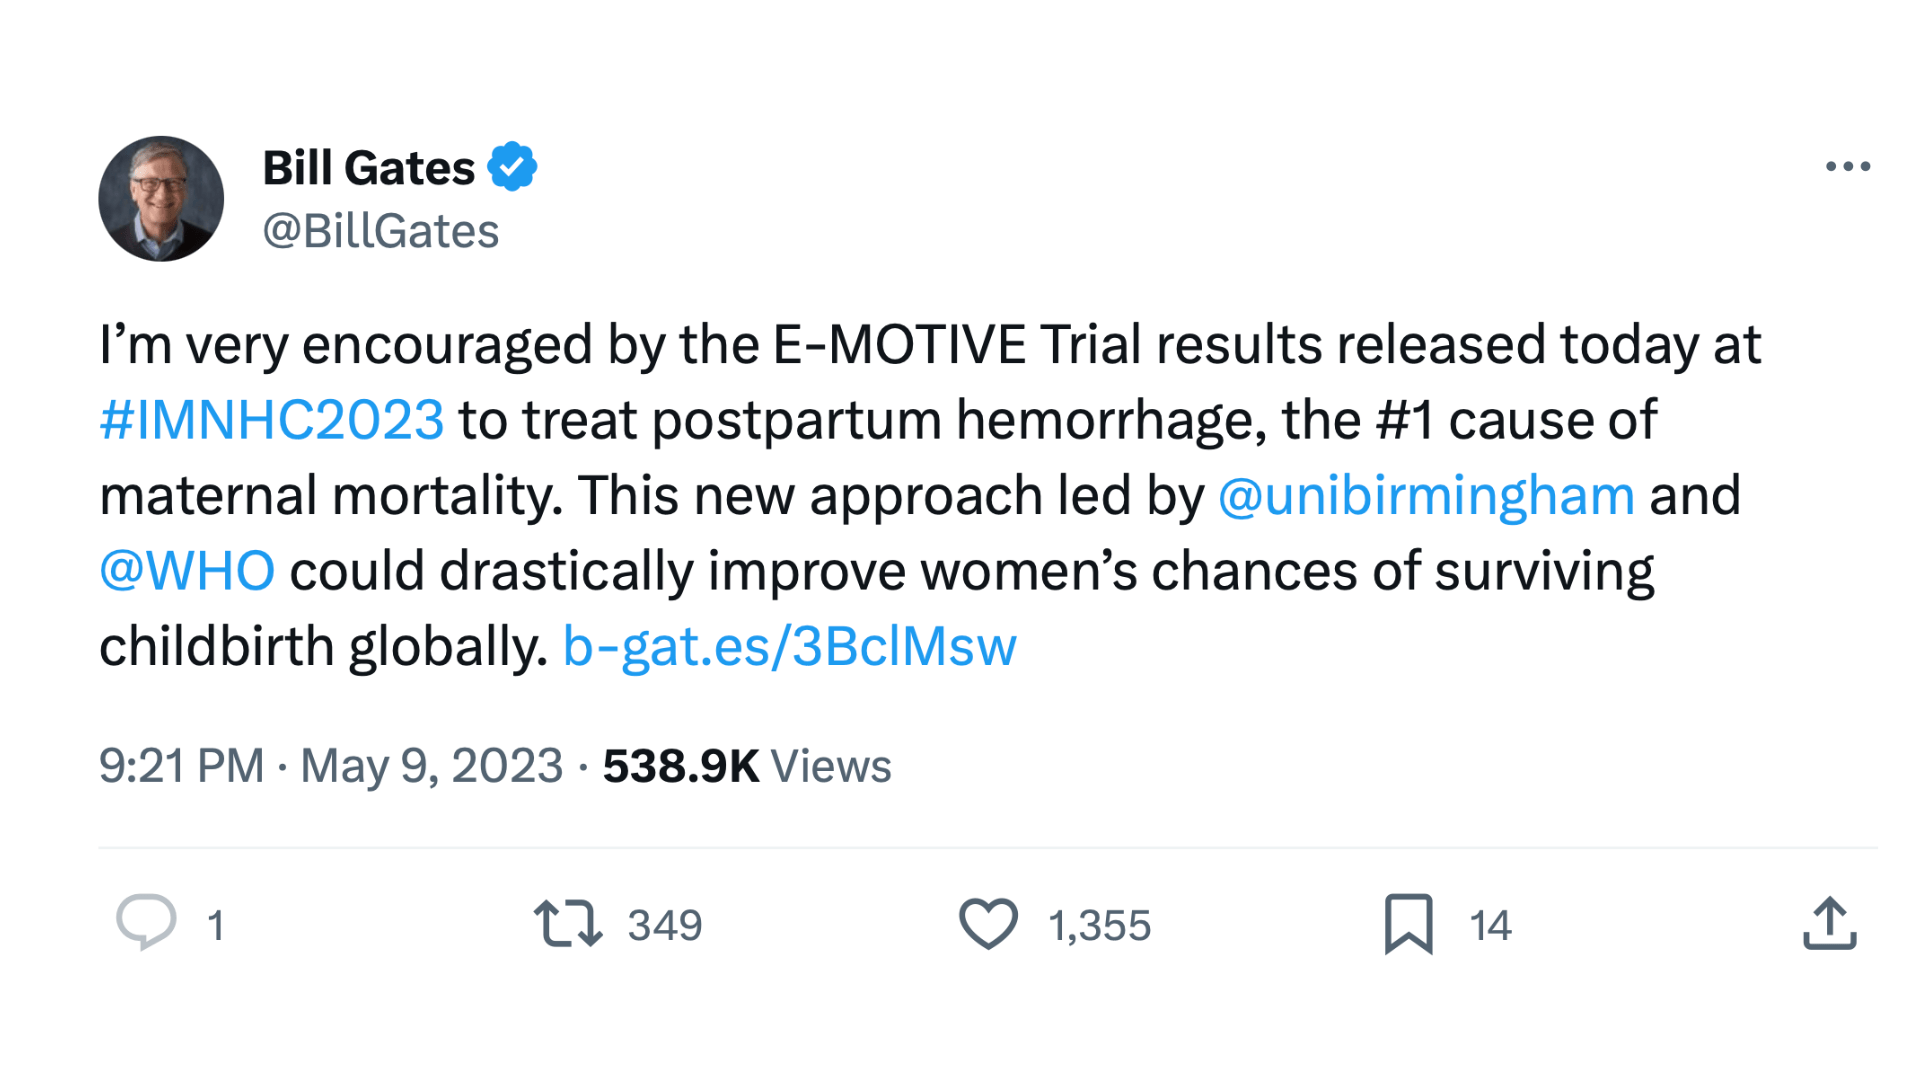 Tweet from Bill Gates about the success of the E-MOTIVE trial 